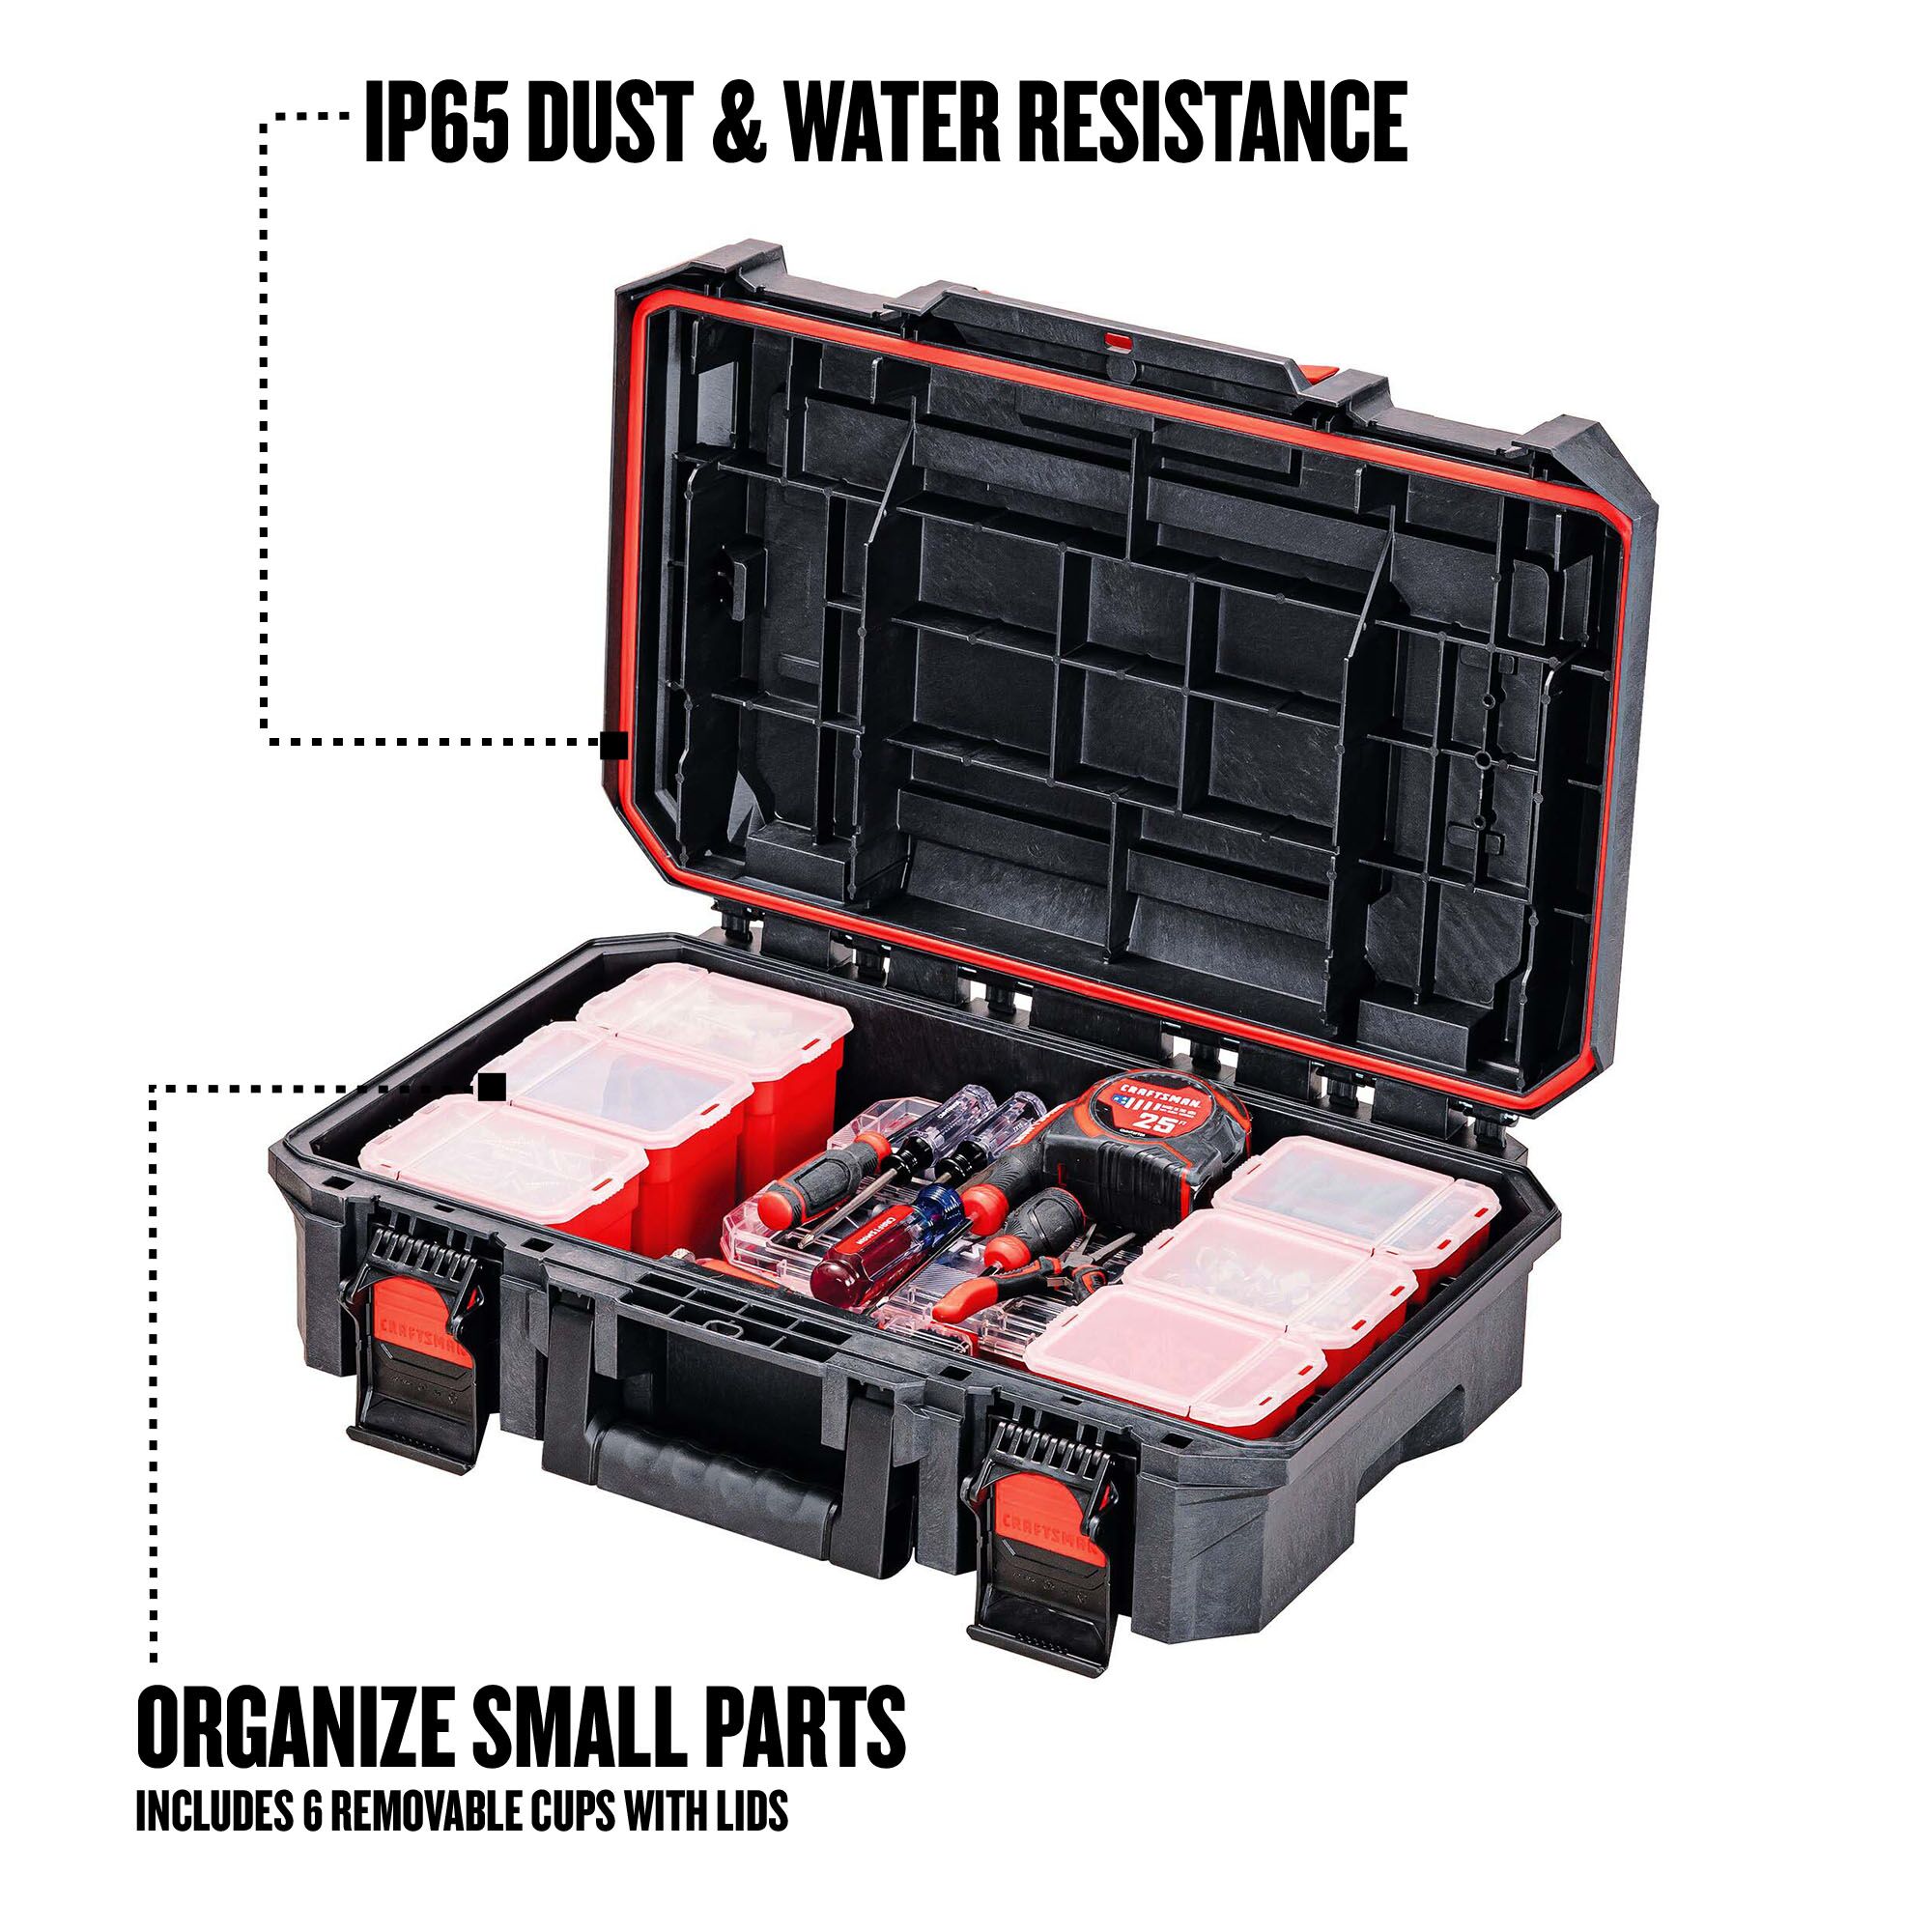 CM 14 Miniature Storage Locking Box with 2 Foams - Carrying Case